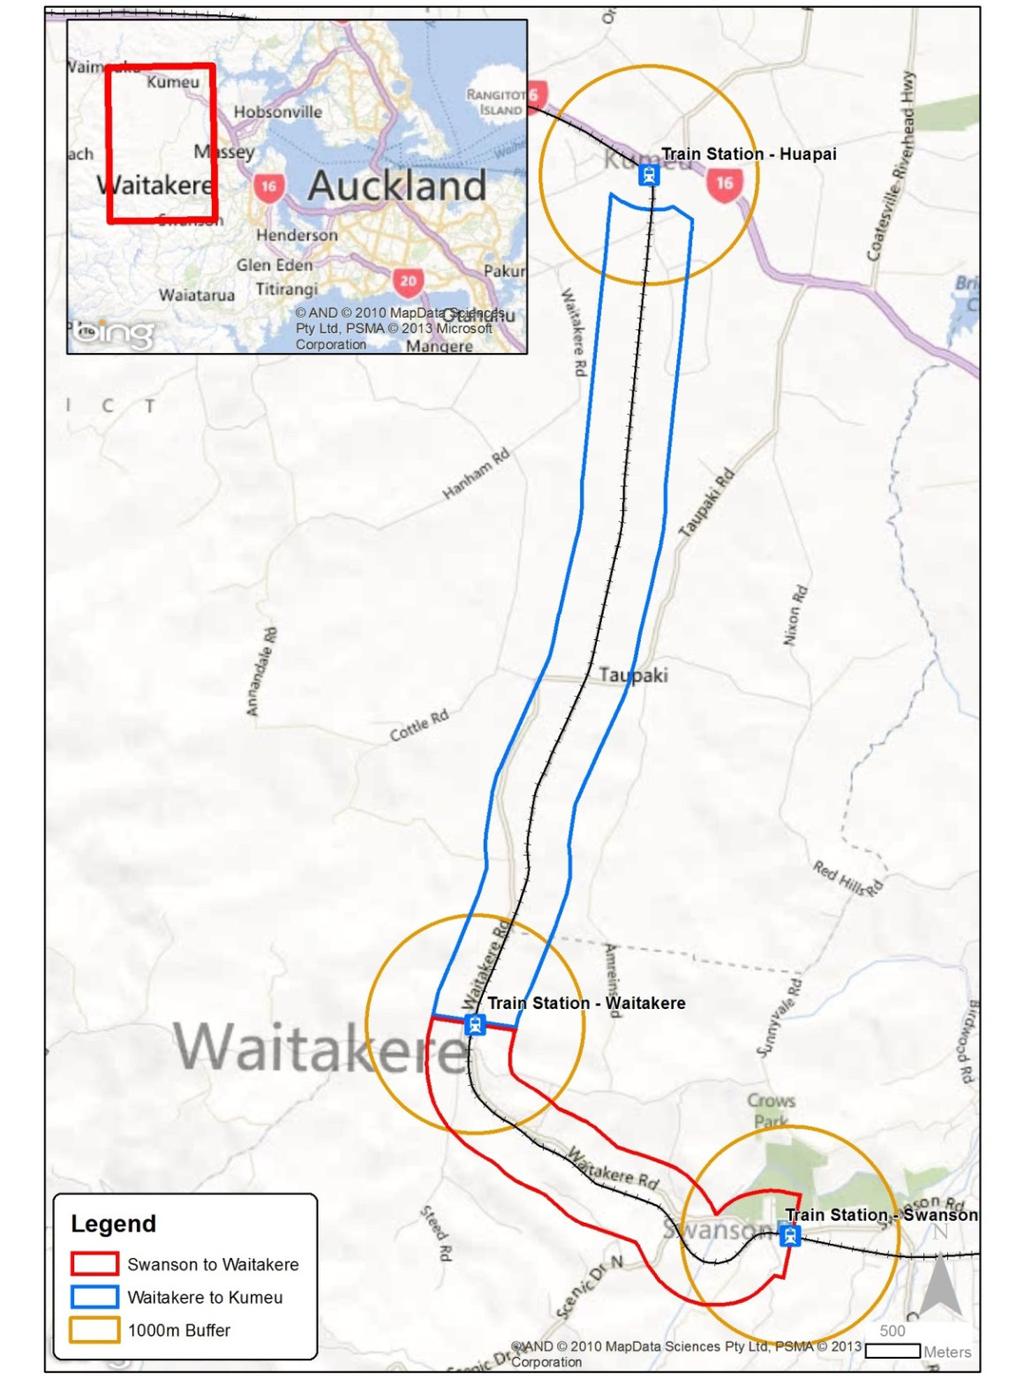 may be affected. To do this, we created a 400m buffer along the proposed bus routes and assessed the population (2011 Statistics New Zealand mesh blocks) within this buffer.